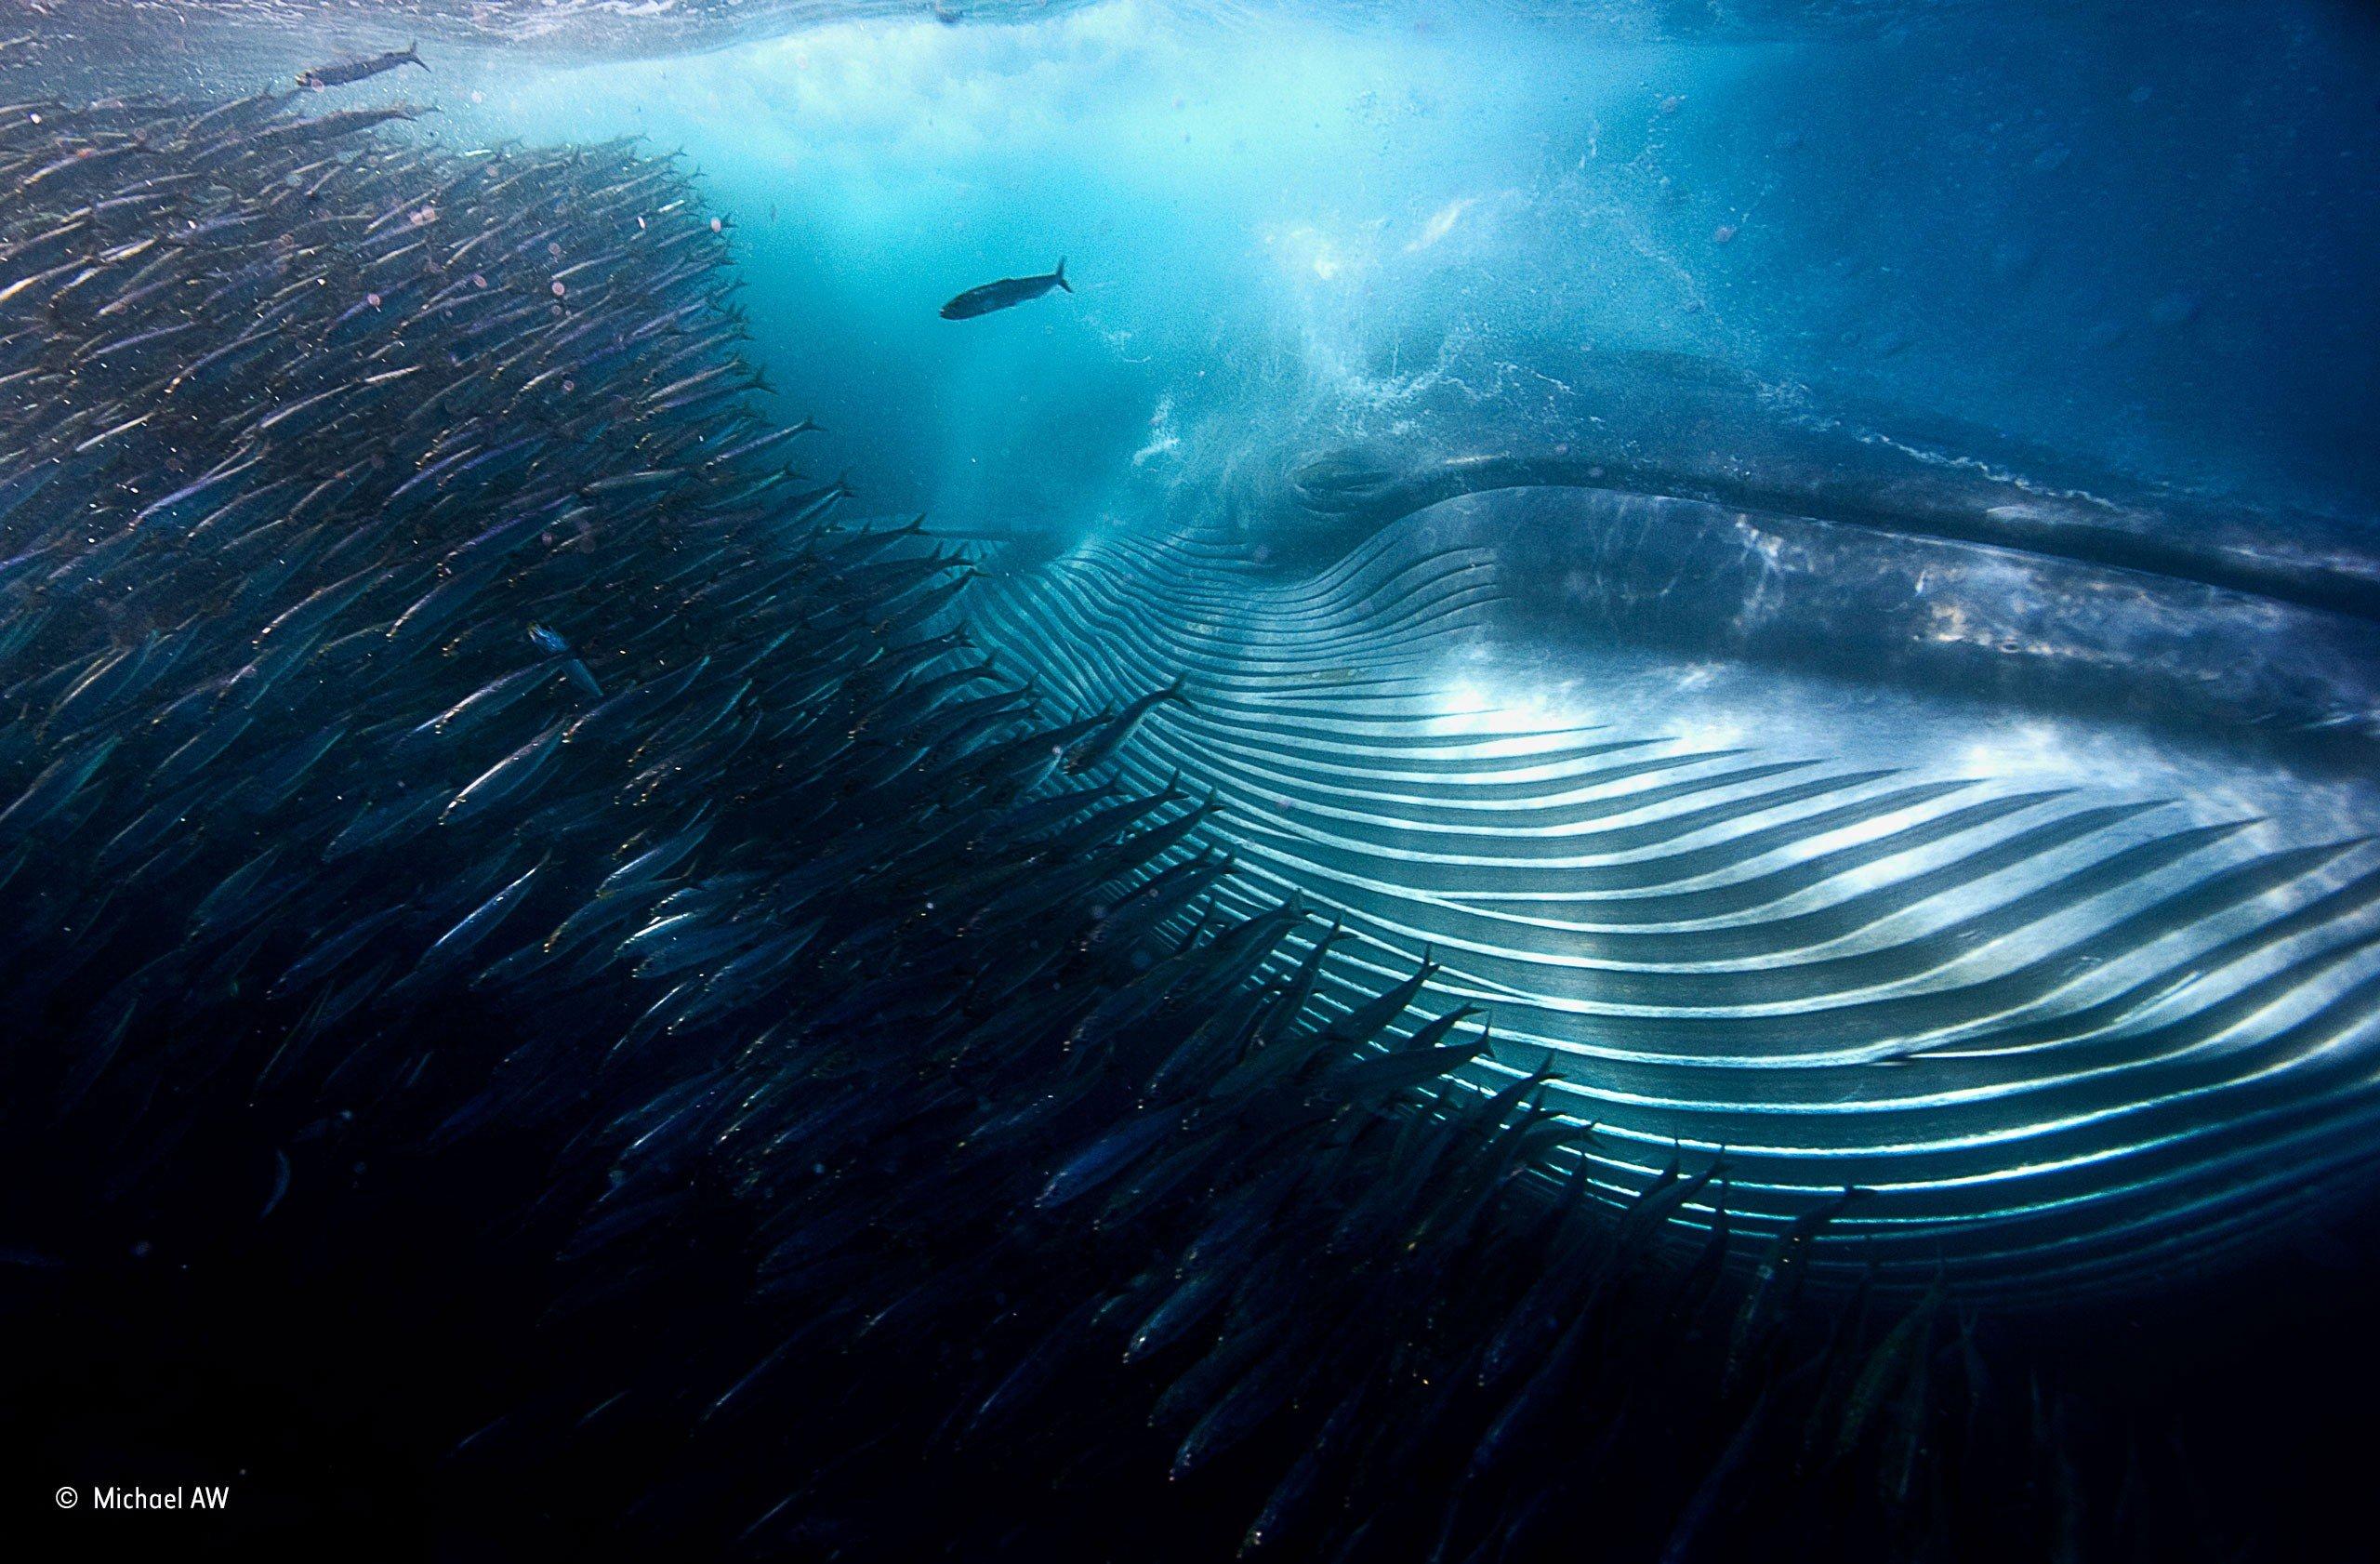 Michael Aw, Water, Underwater, Sea, Whale, Fish, South